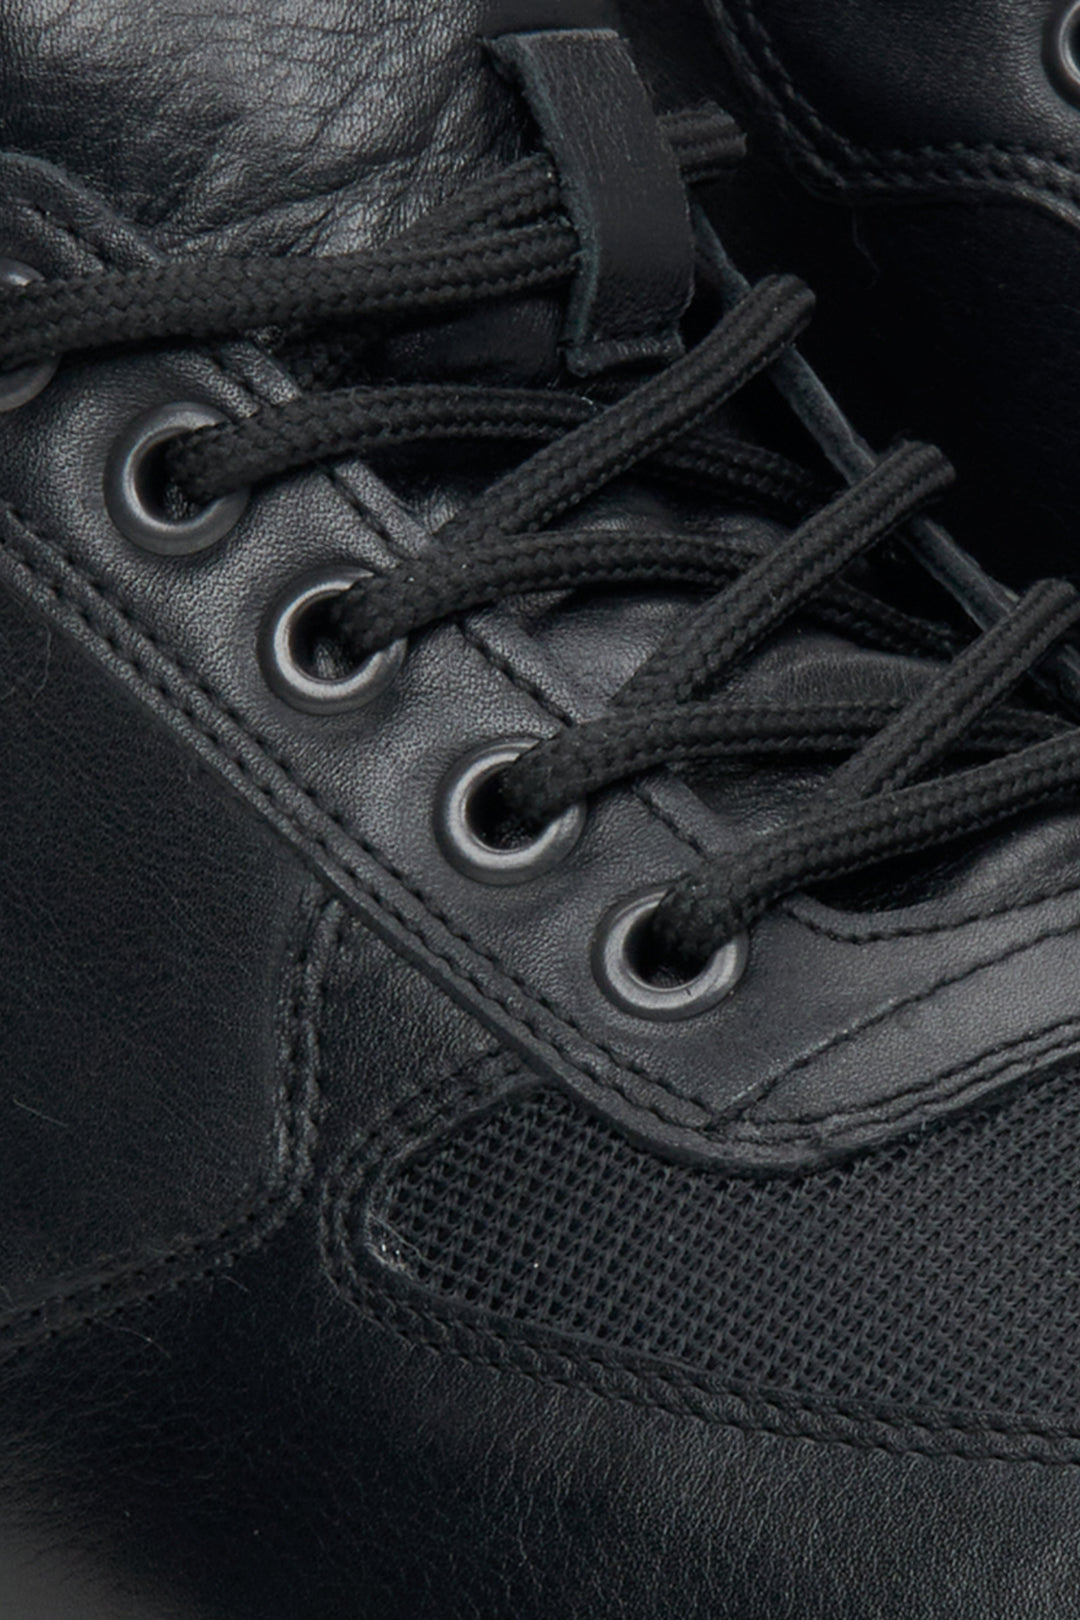 Men's black leather high-top  sneakers by Estro - close-up on the details.